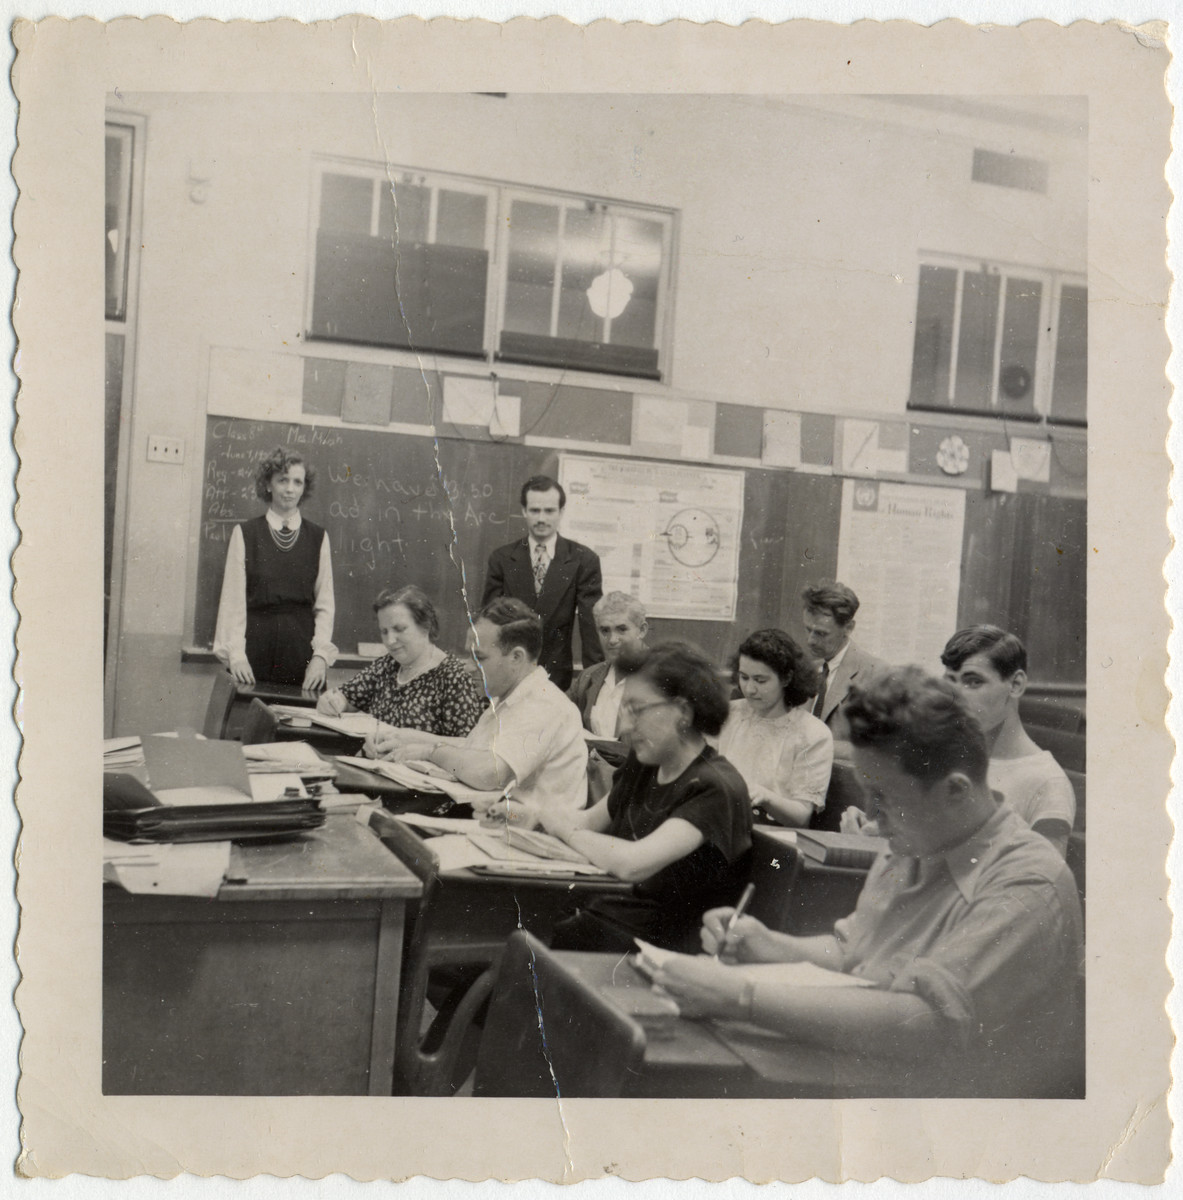 Group portrait of students in an English language class for Deaf immigrants, taught by Alice McVan, a Gallaudet alumna.

Among those pictured are Alice McVan (standing, far left); and (seated left to right) Hilda Wiener Rattner, Richard Wiener, Doris Fedrid, and Fred Fedrid.